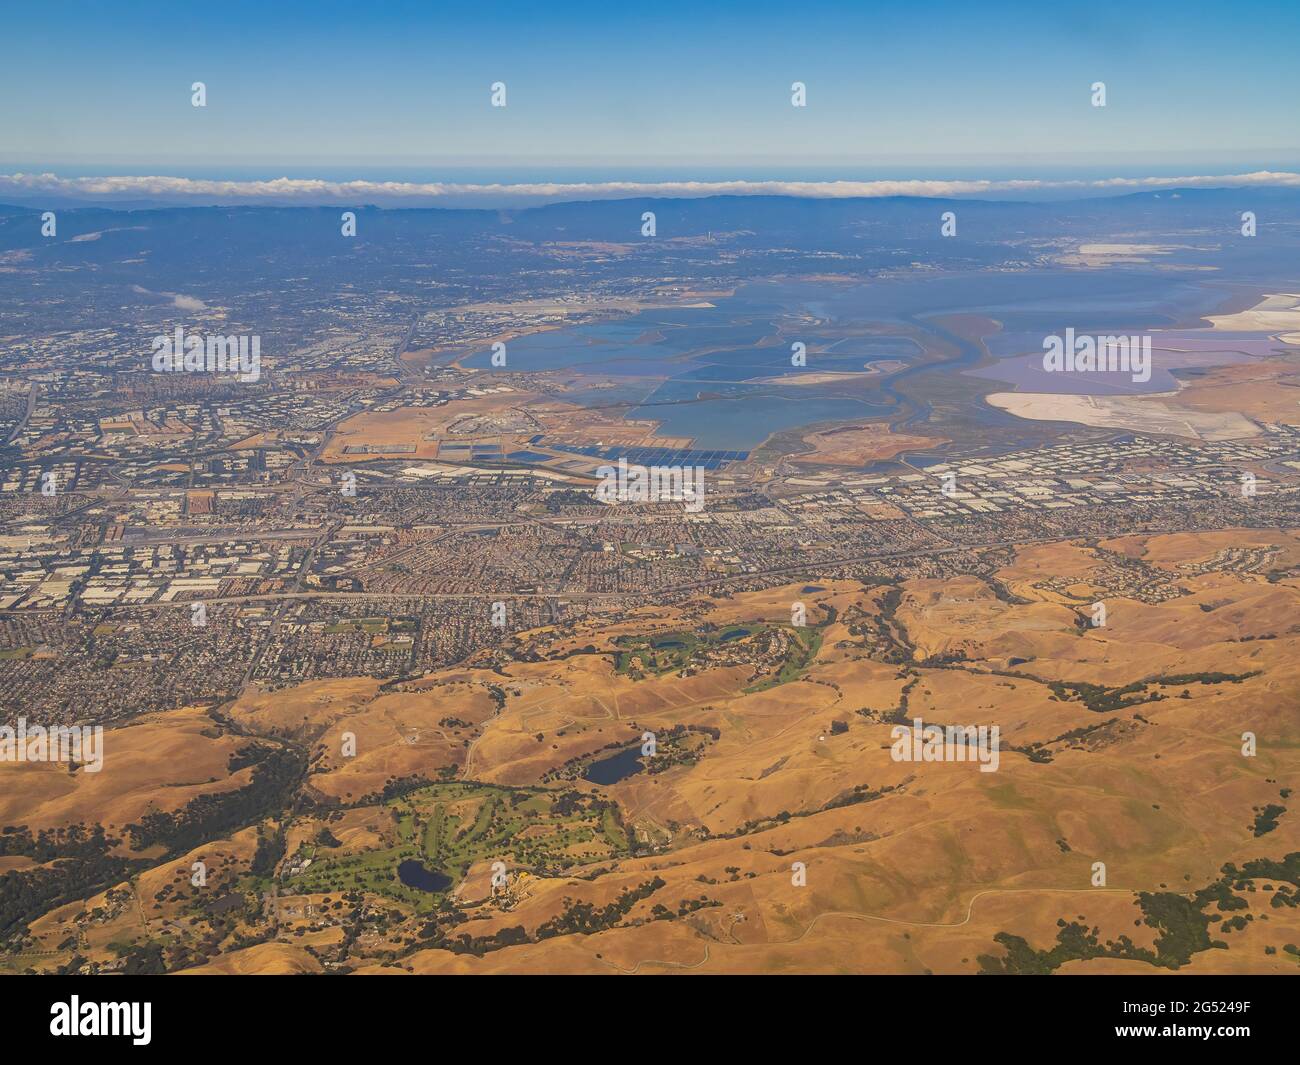 Aerial view of the San Jose area and Ed R. Levin County Park at California Stock Photo